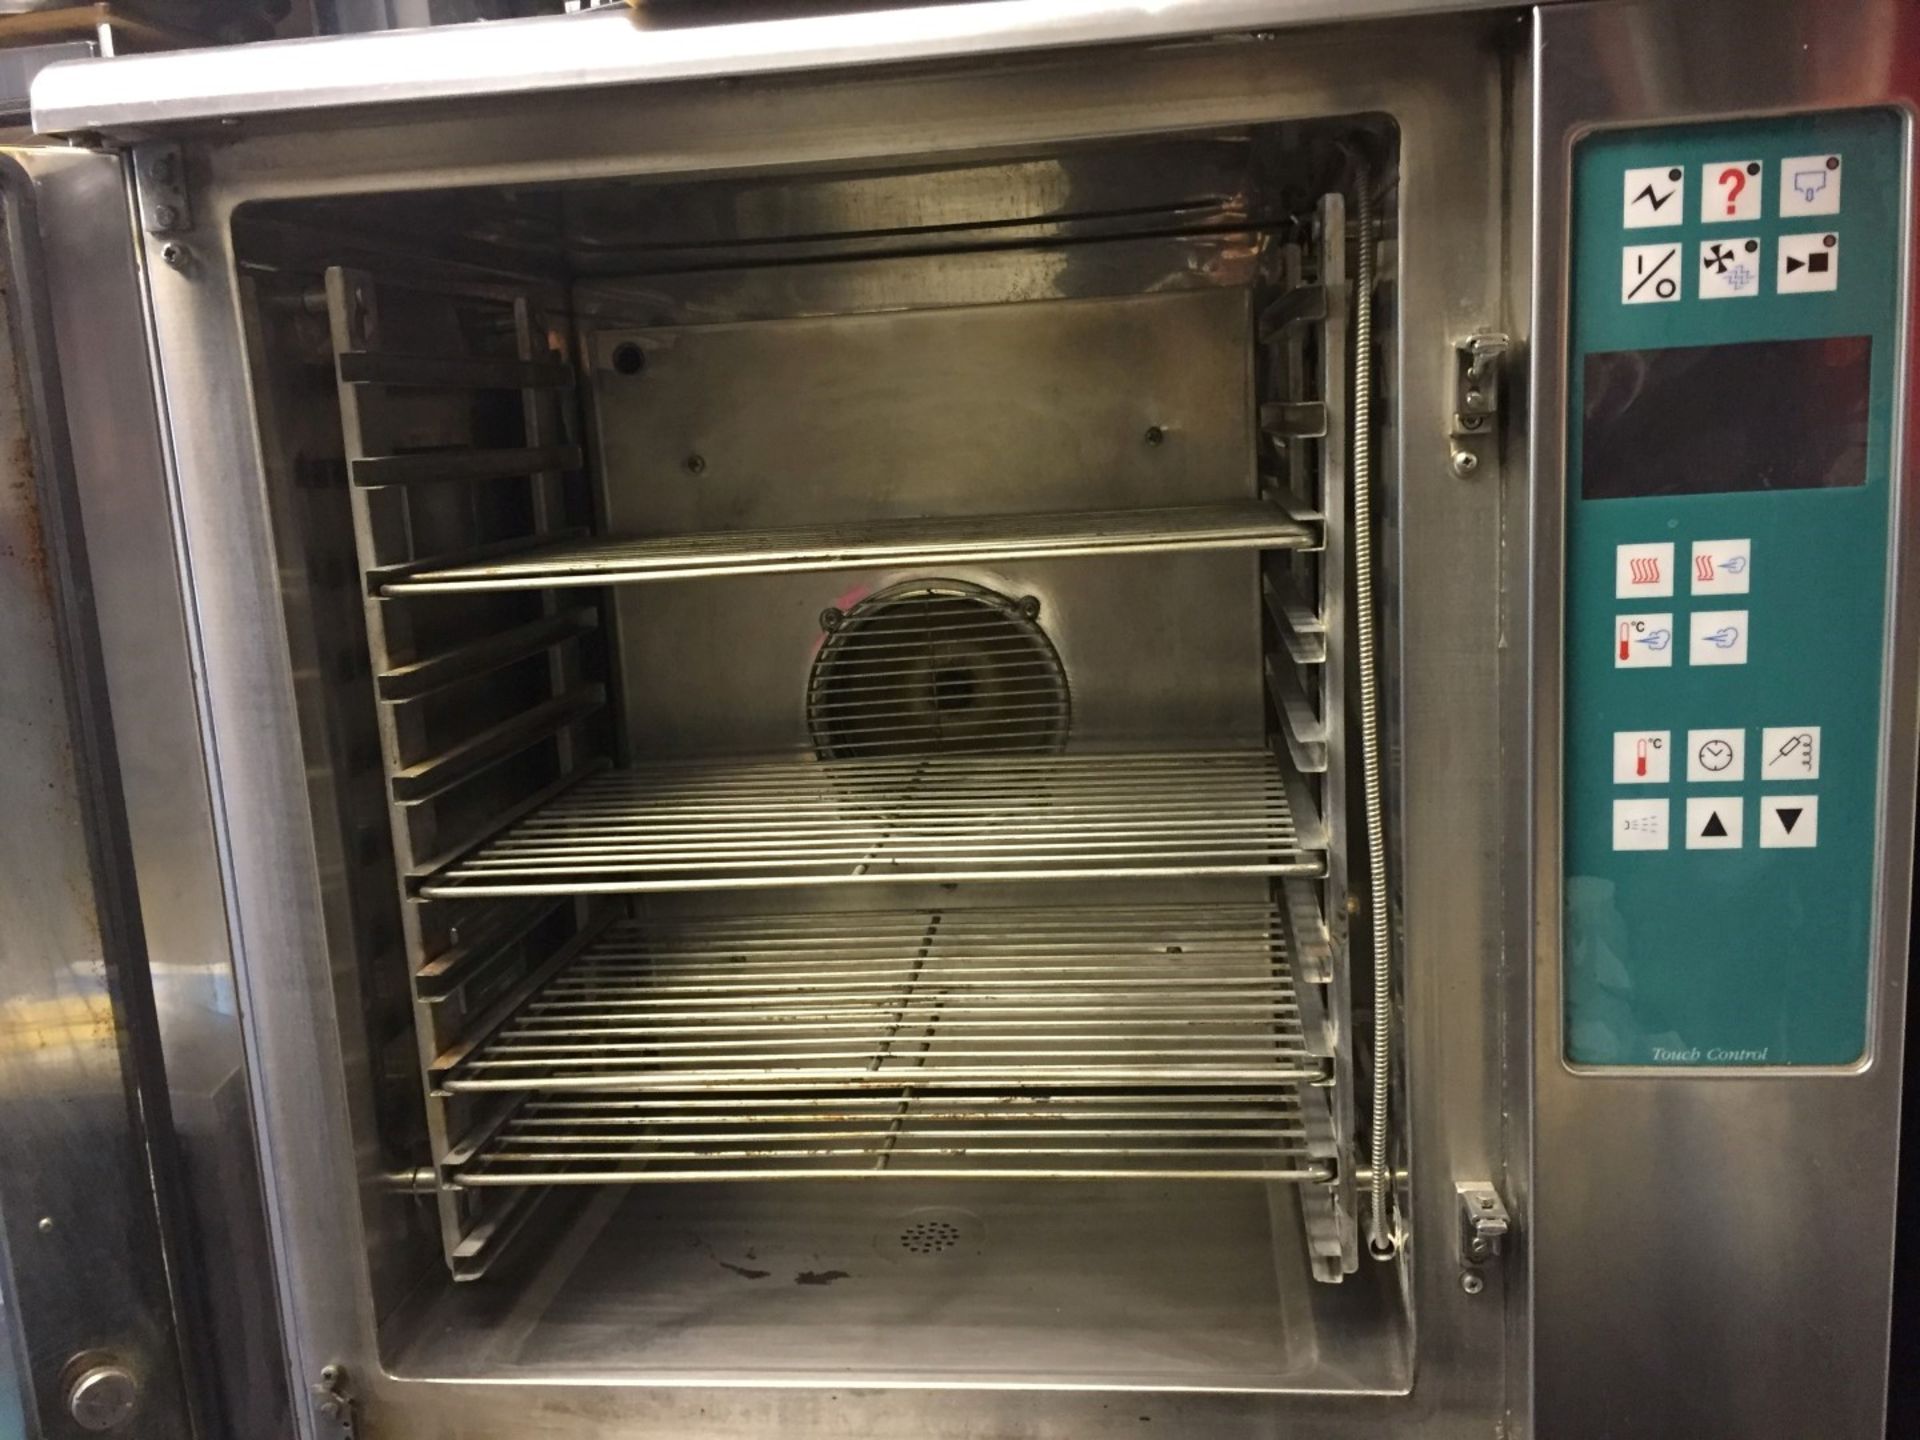 1 x Falcon CONVECTASTEAM-10 Commercial Convection Oven With Stand (Model: E4103TC) - Phase 3 - - Image 11 of 17